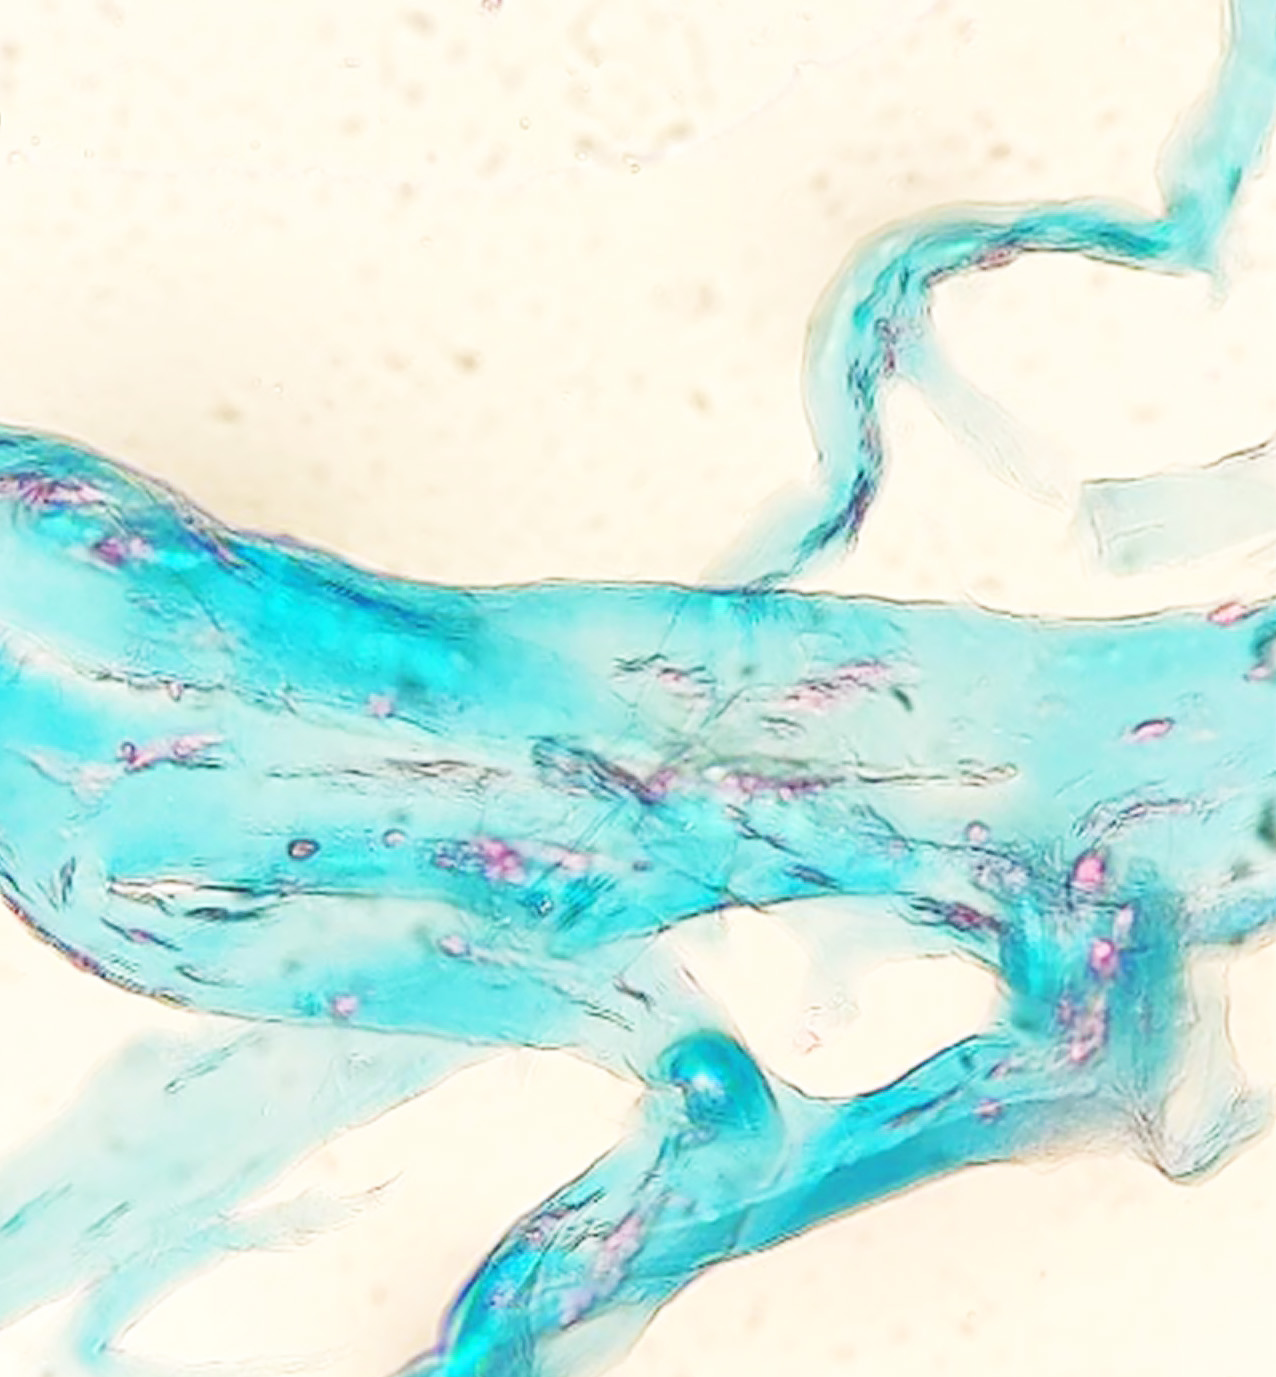 A section of tissue stained a bluish-green stretches across this image. Scattered throughout the tissue are small clumps of cells stained a pinkish-red.